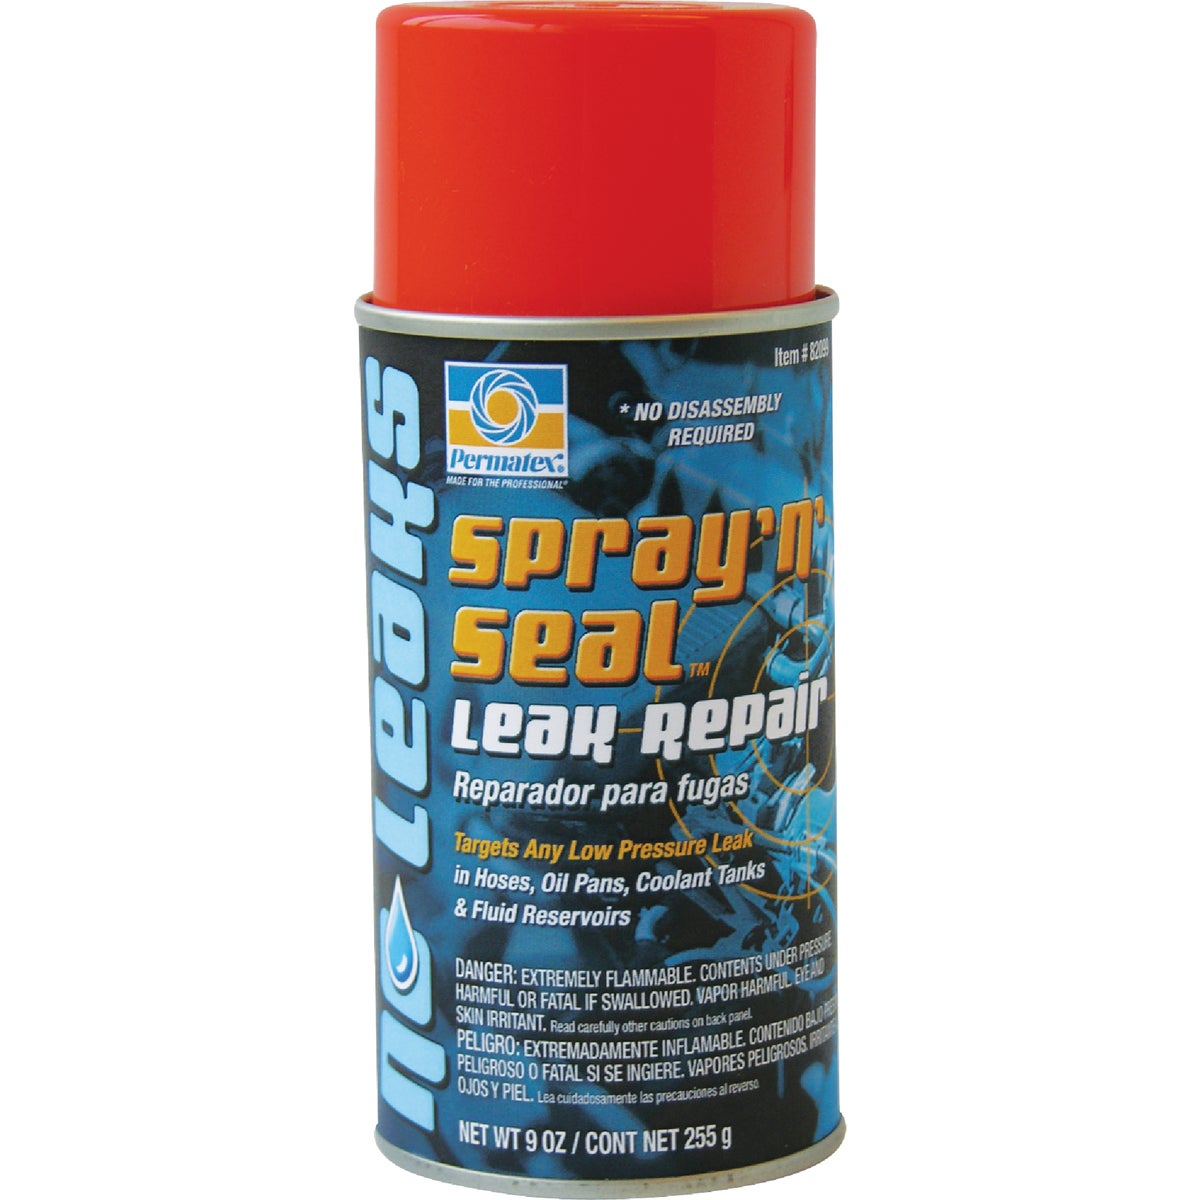 Item 575704, Spray'n'Seal Leak Repair is a sprayable sealer that forms a durable rubber 